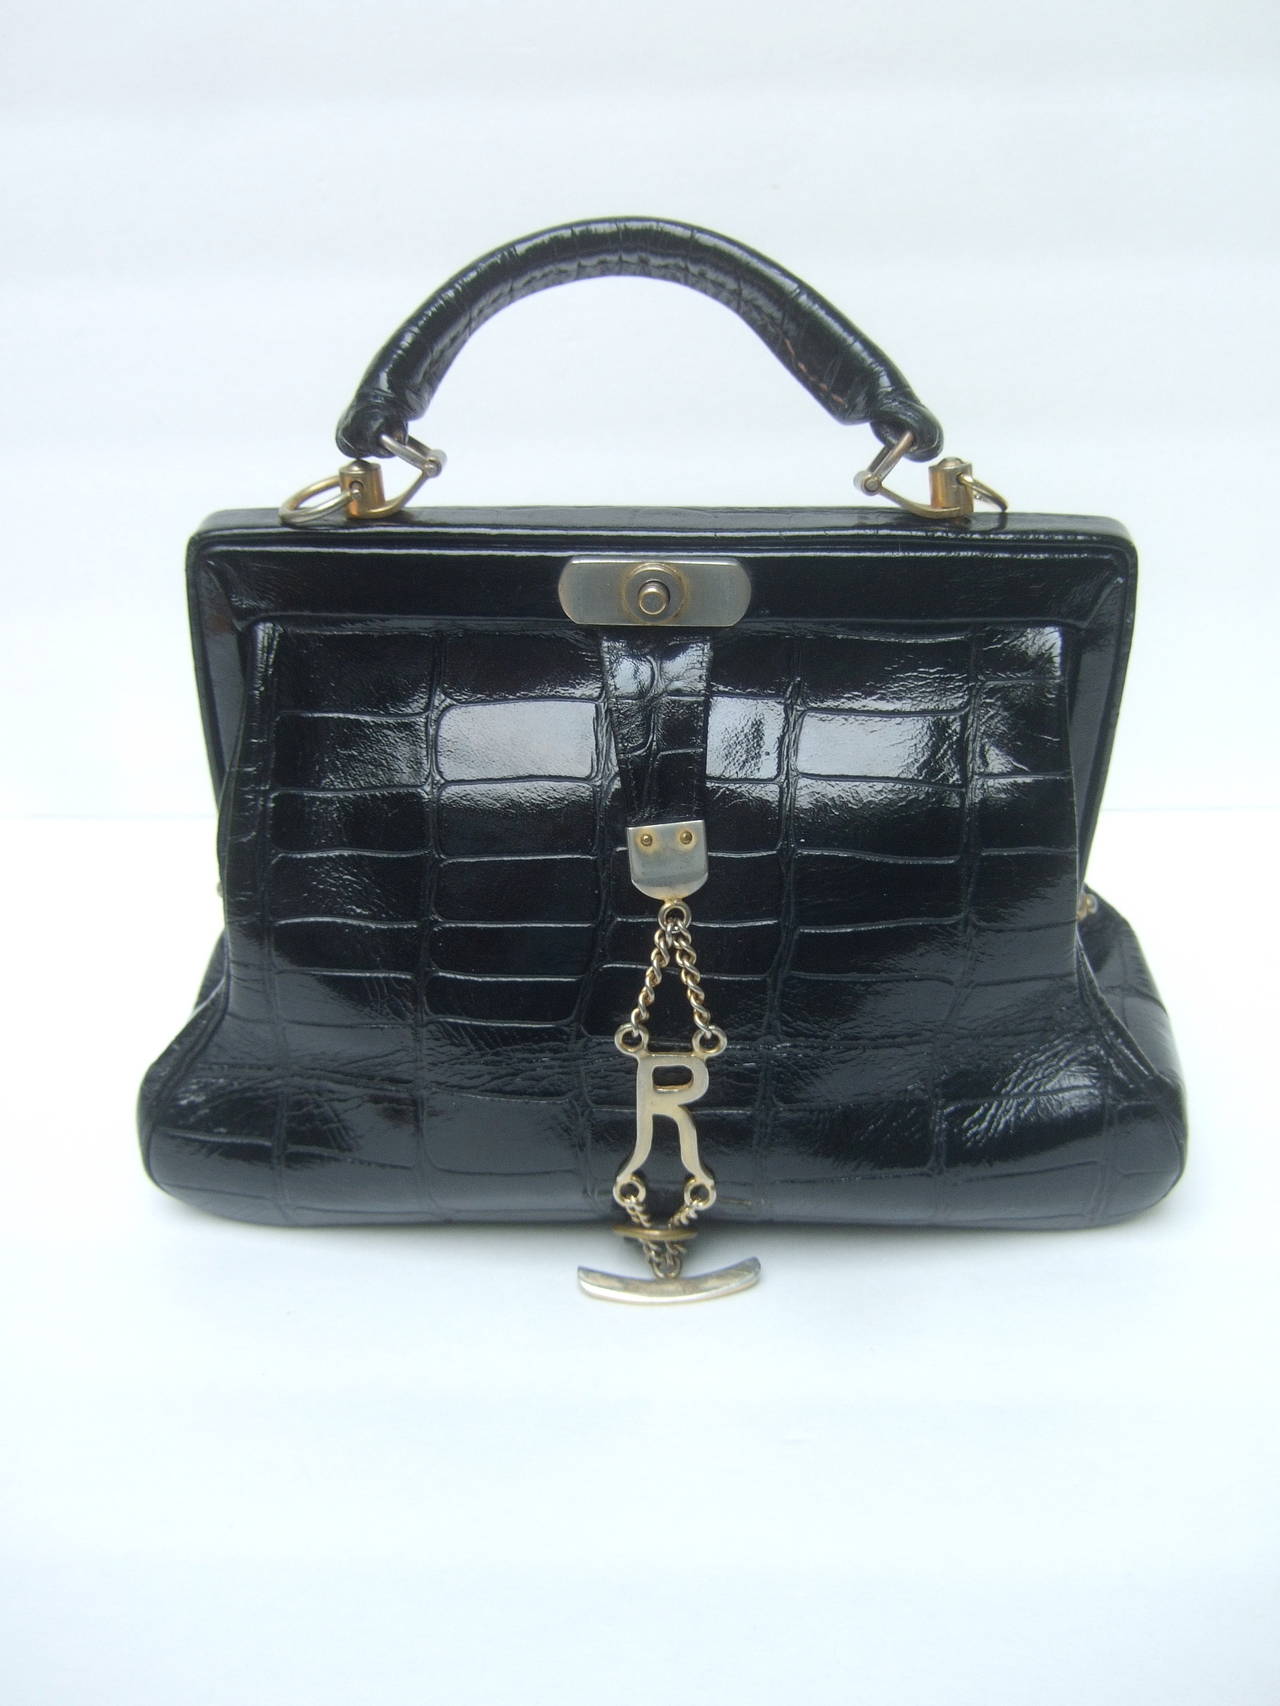 Roberta Di Camerino Sleek embossed black leather handbag Made in Italy 
The chic Italian handbag is designed with high gloss embossed leather
that emulates reptile scales

The elegant retro handbag is embellished with gilt metal chains
with Di